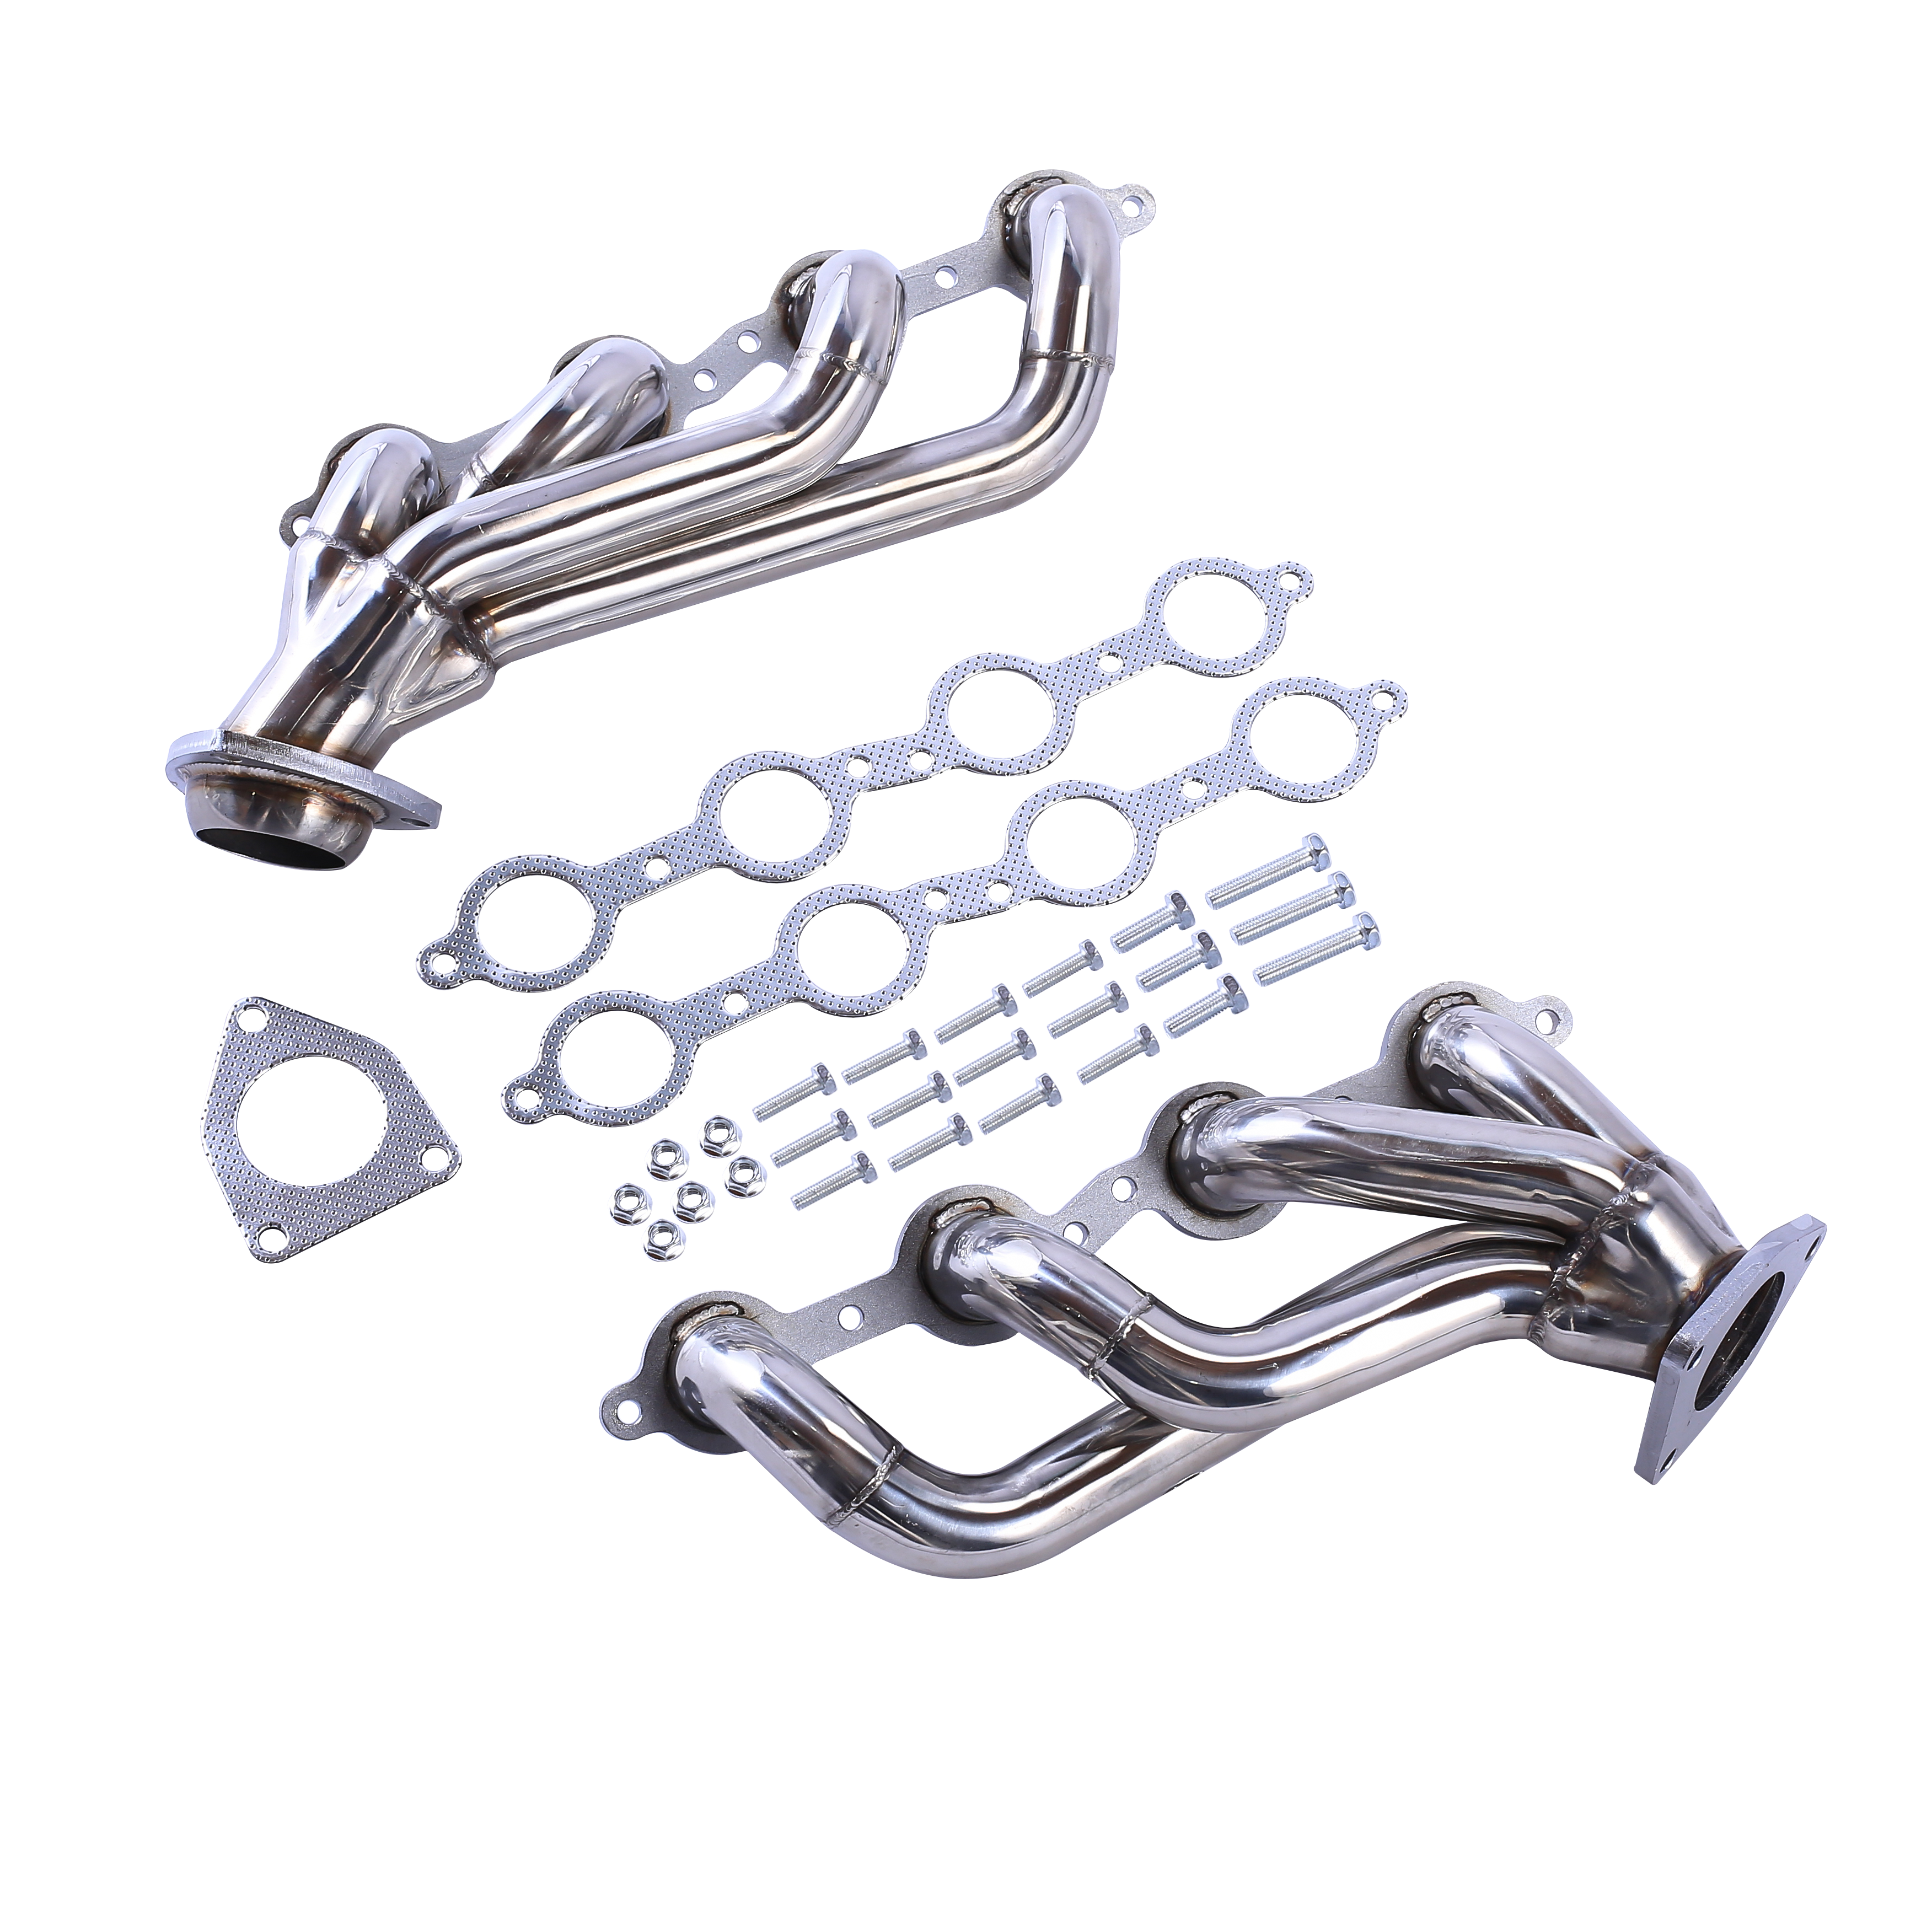 Auto Exhaust Headers for 00-01 GMC YUKON 4.8L 5.3L with EGR/ 99-01 GMC SIERRA 1500 2500 With EGR